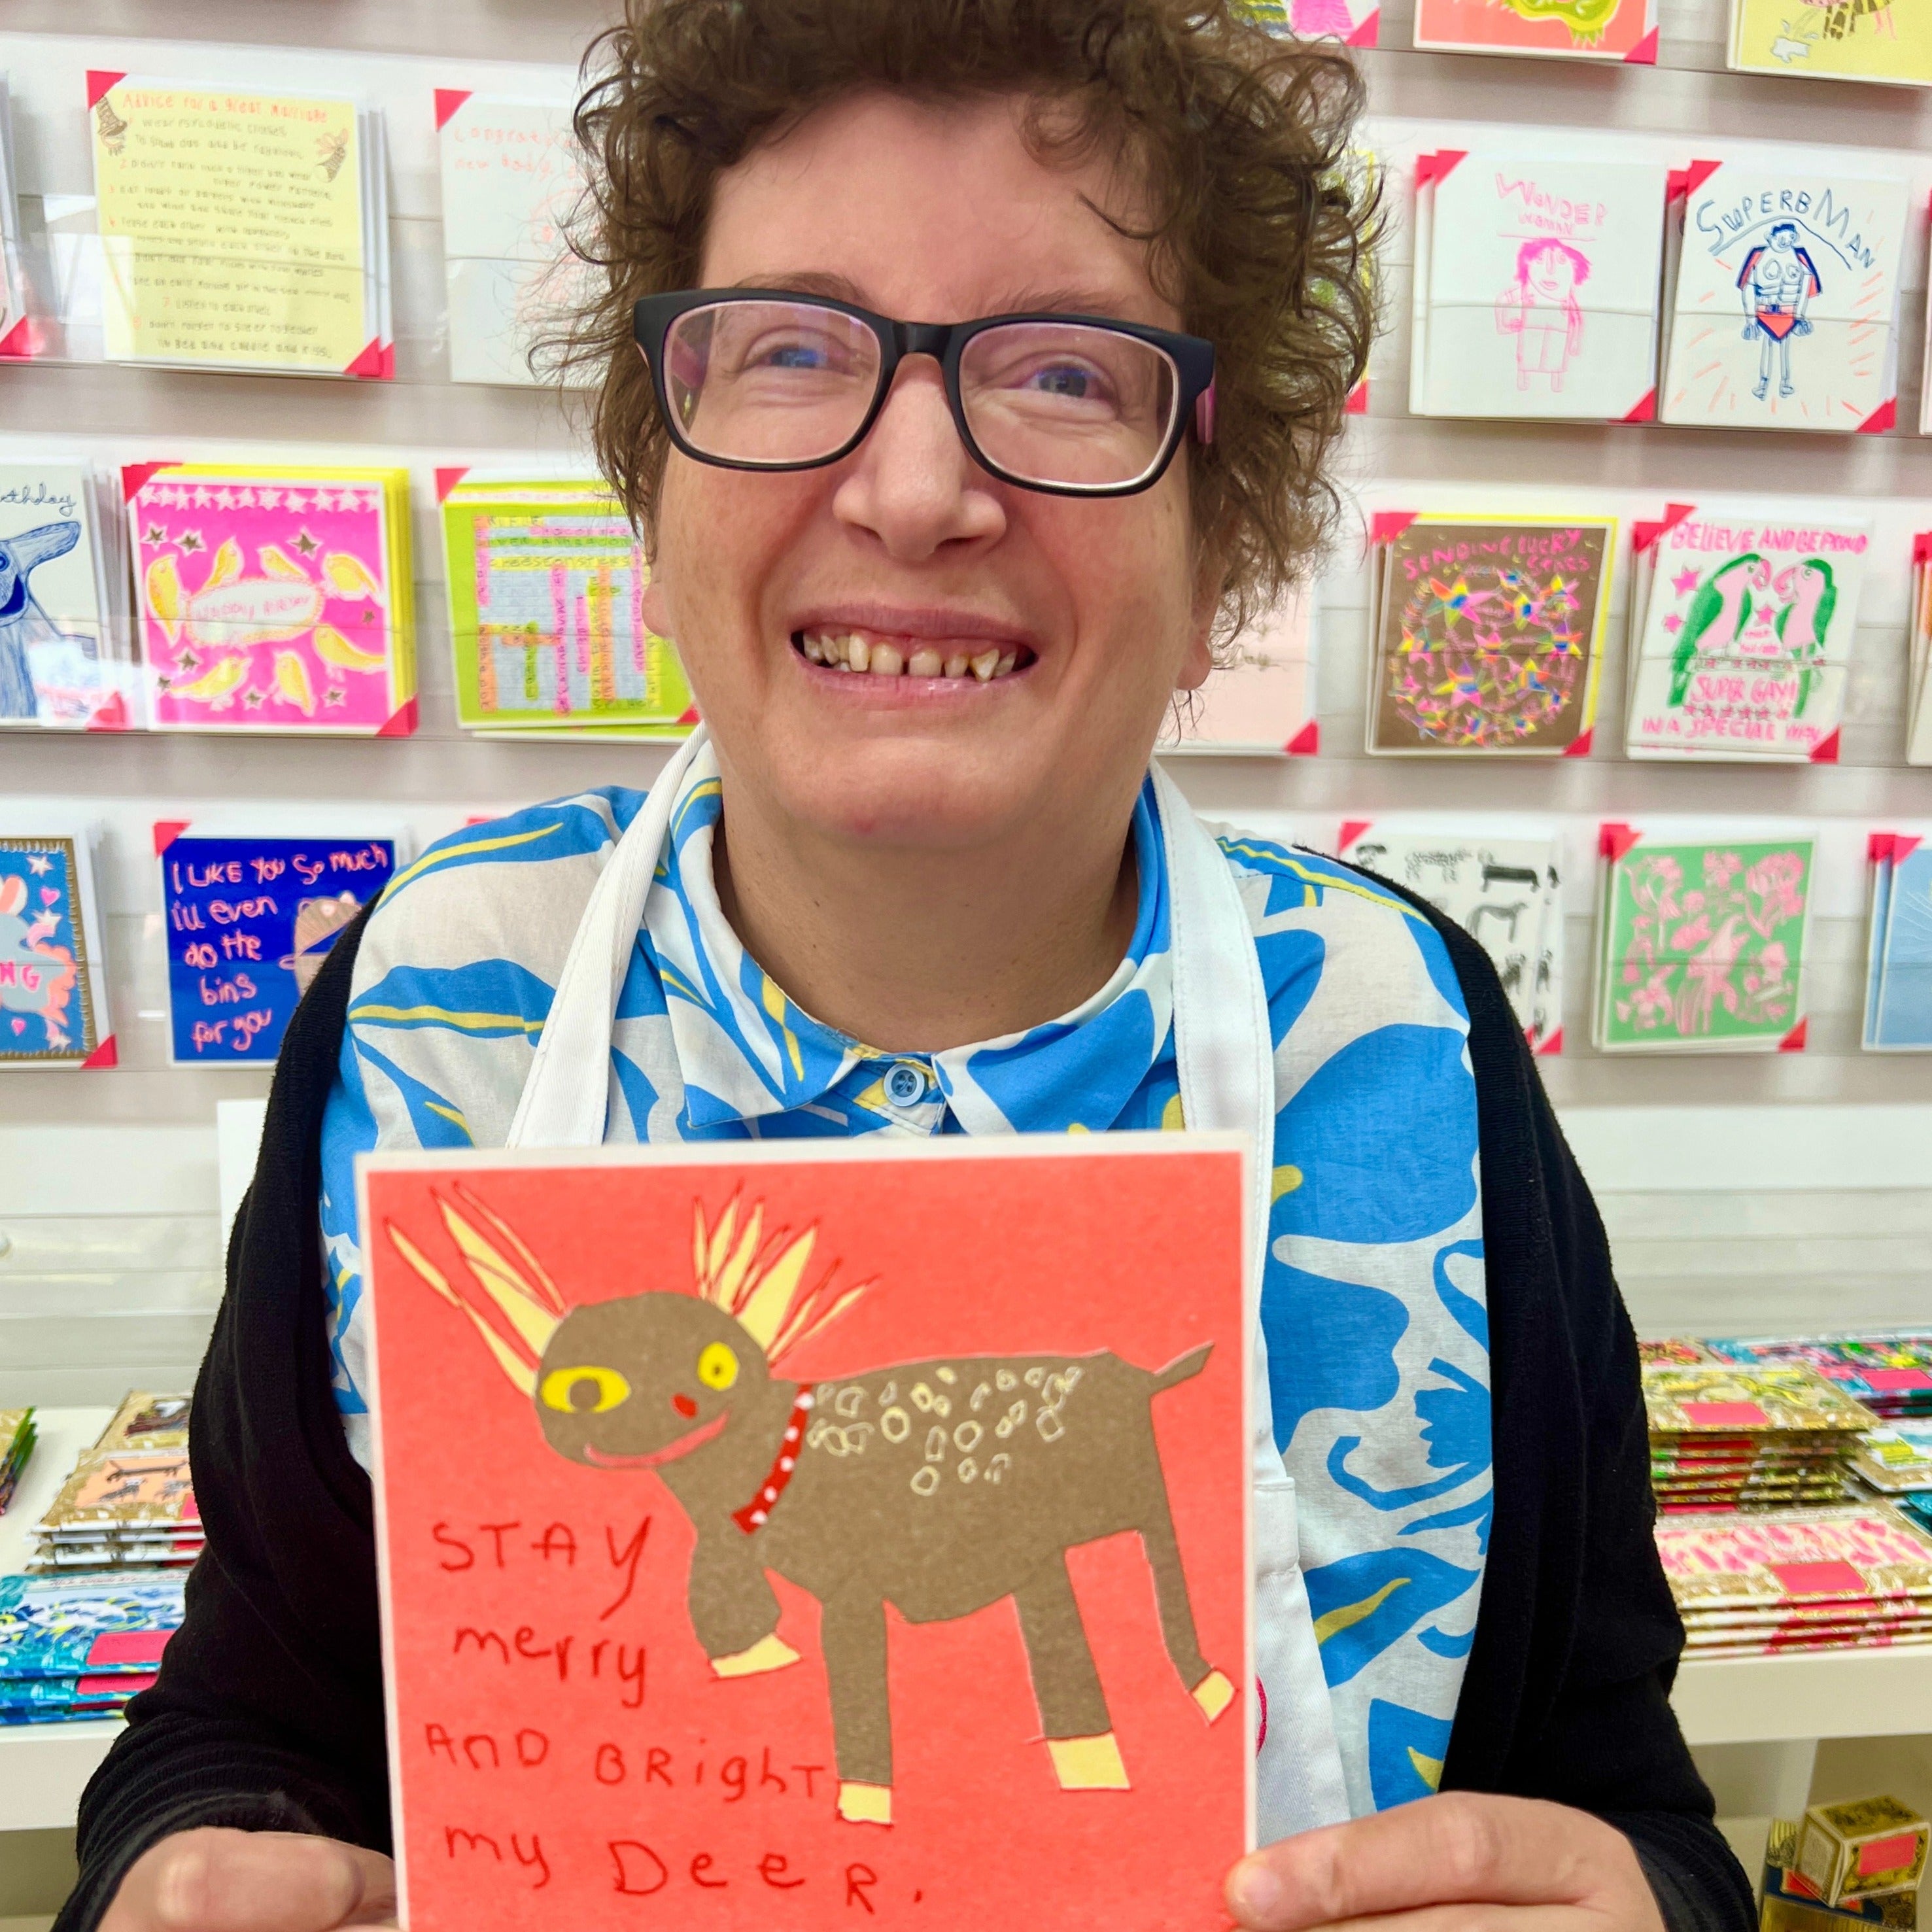 A female artist holding An orange, gold and yellow card with a hand drawn deer and the words stay merry and bright my deer